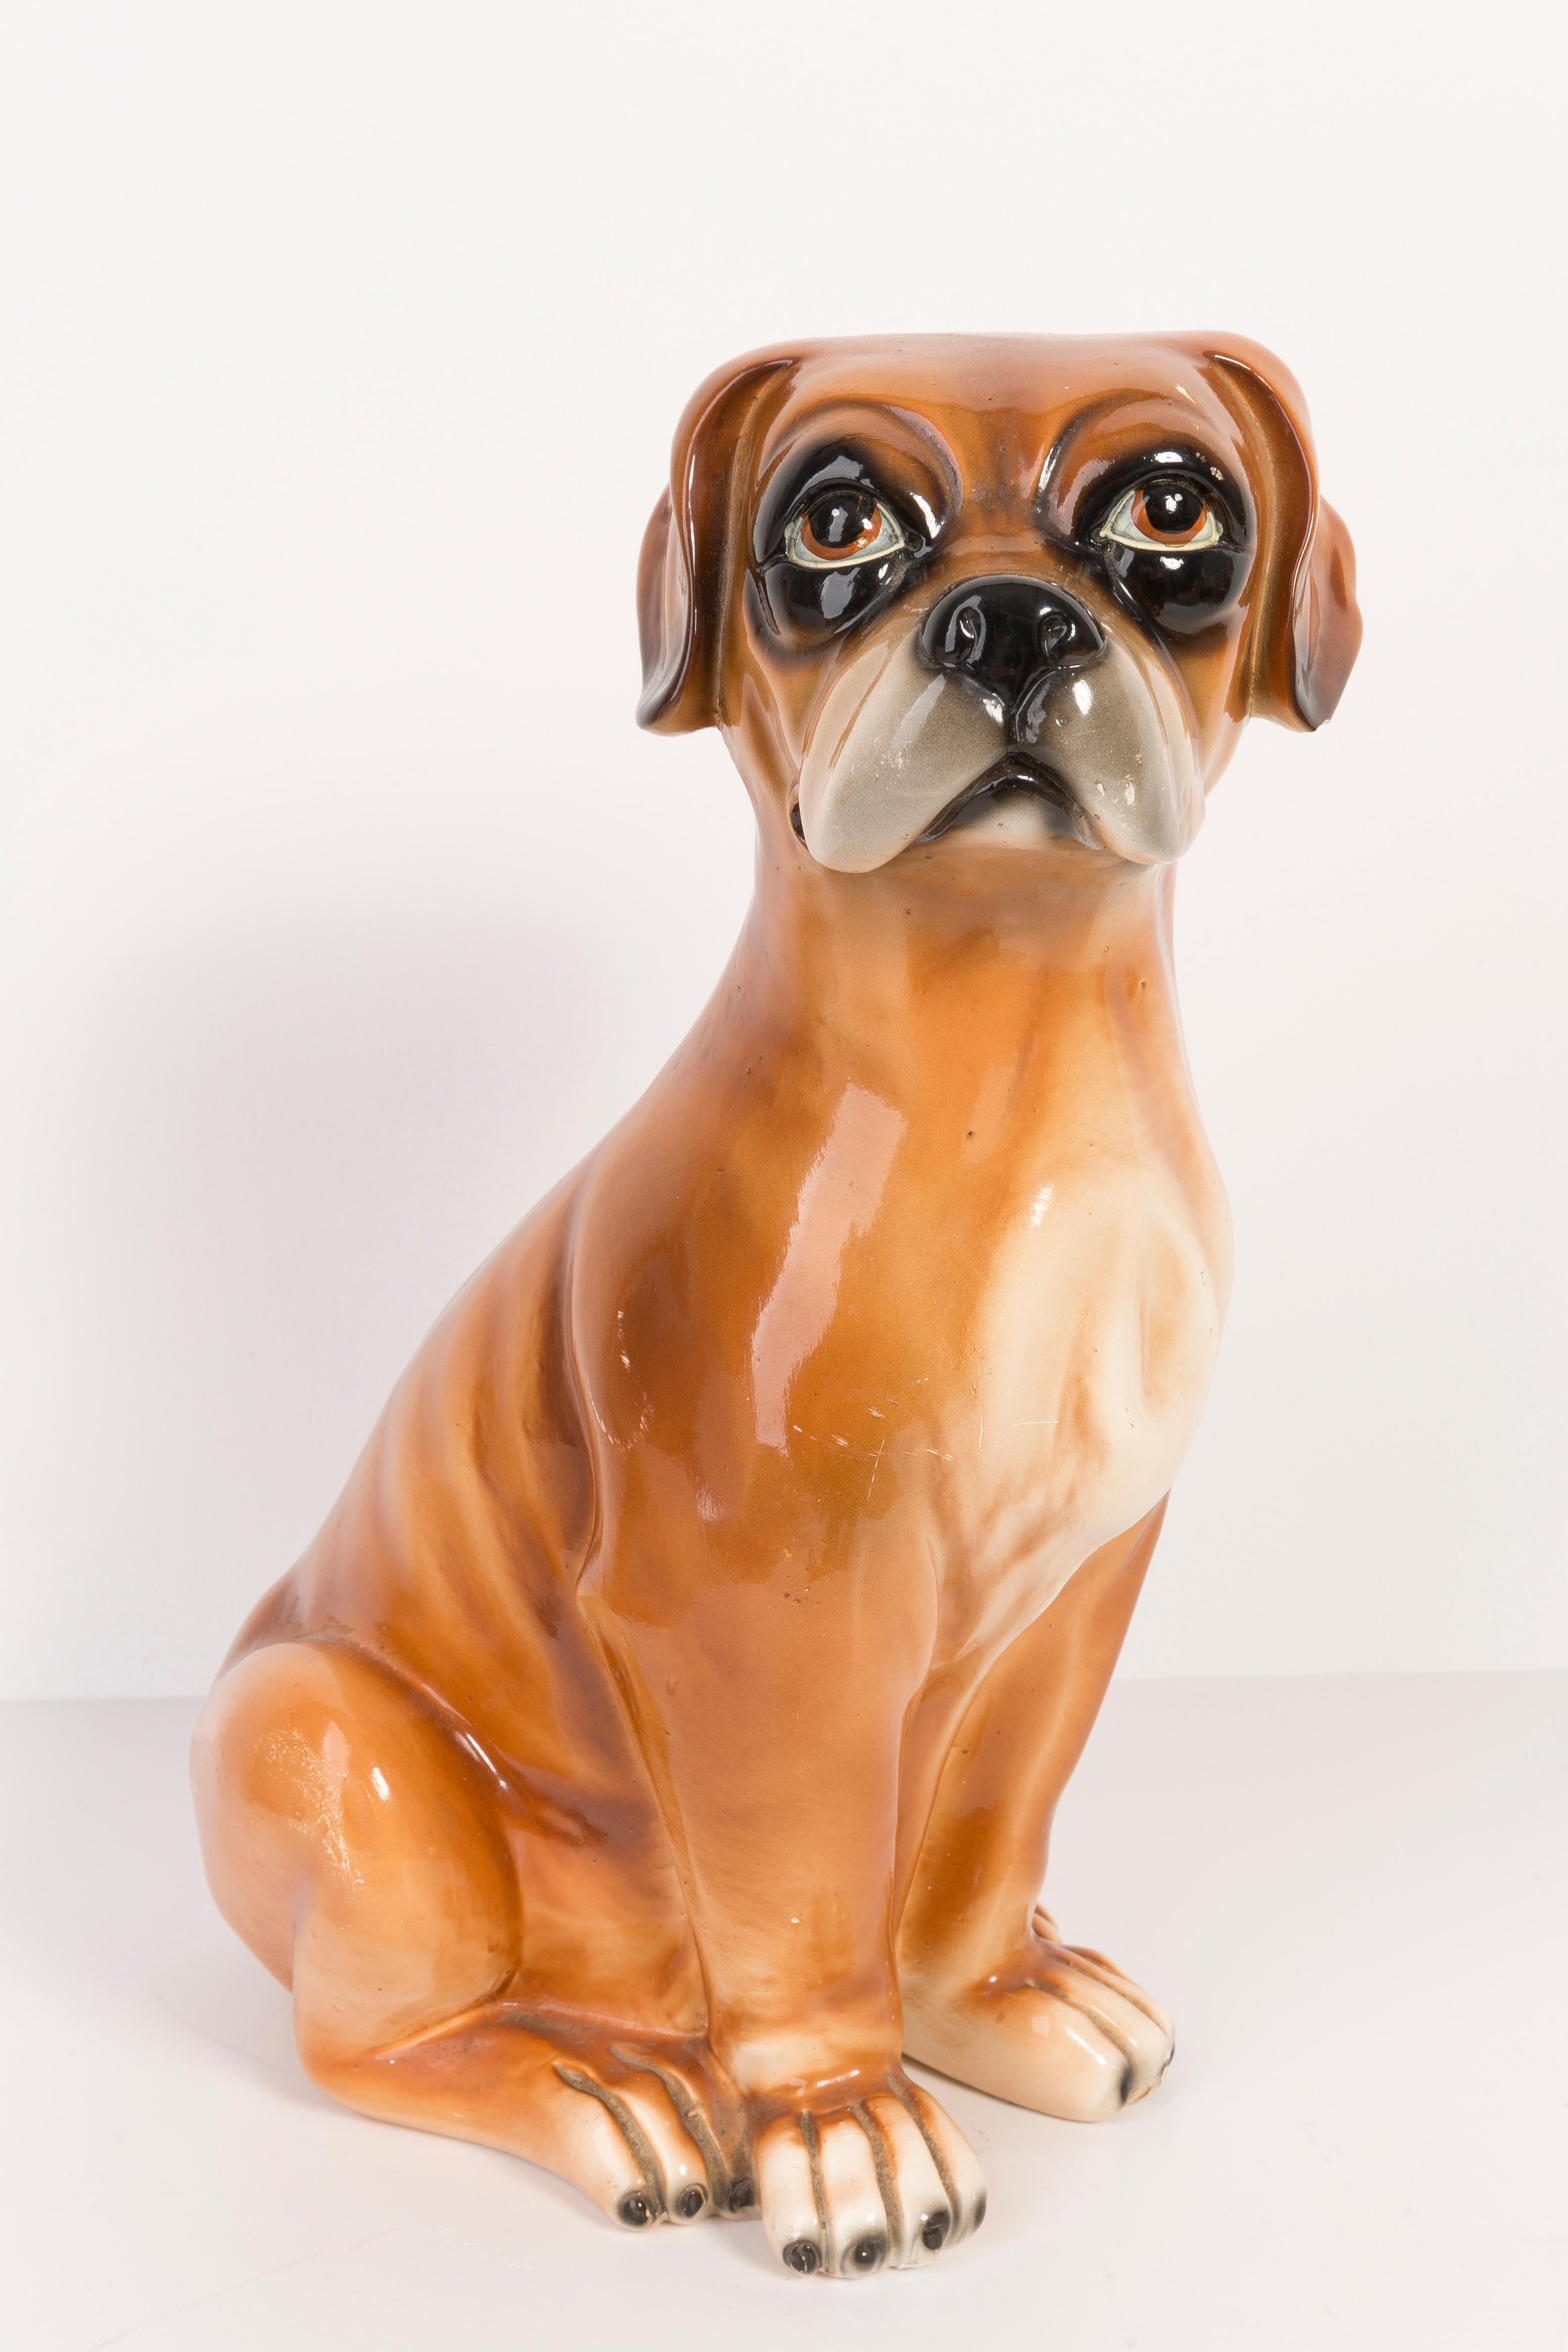 Painted ceramic/terracotta, good original vintage condition. Beautiful and unique decorative sculpture. Boxer dog was produced in 1960s in Italy.